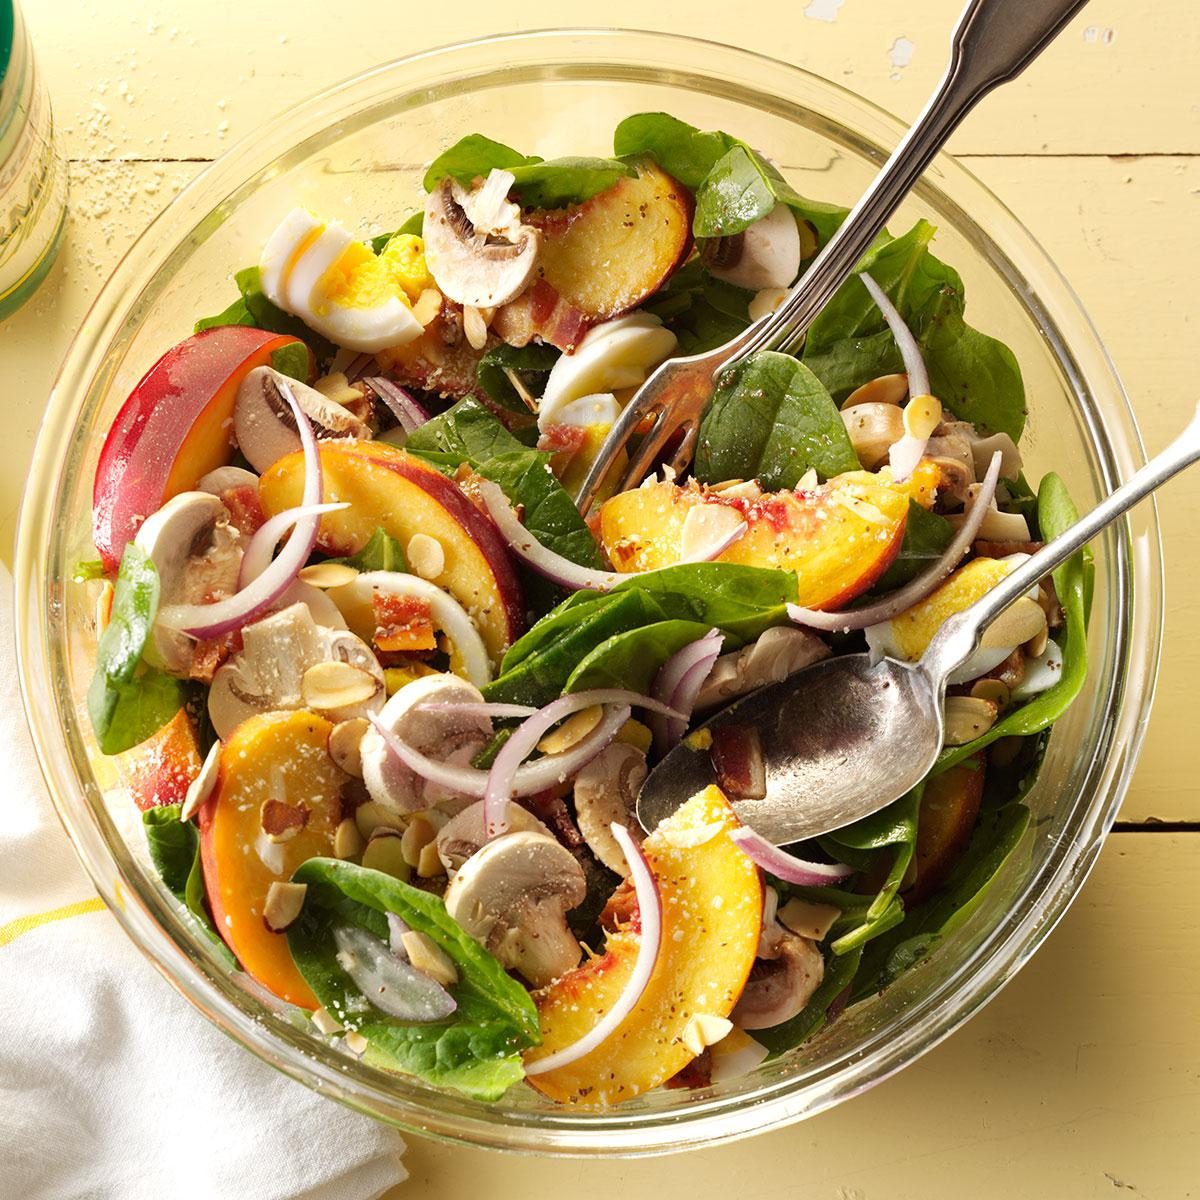 Spinach & Bacon Salad with Peaches